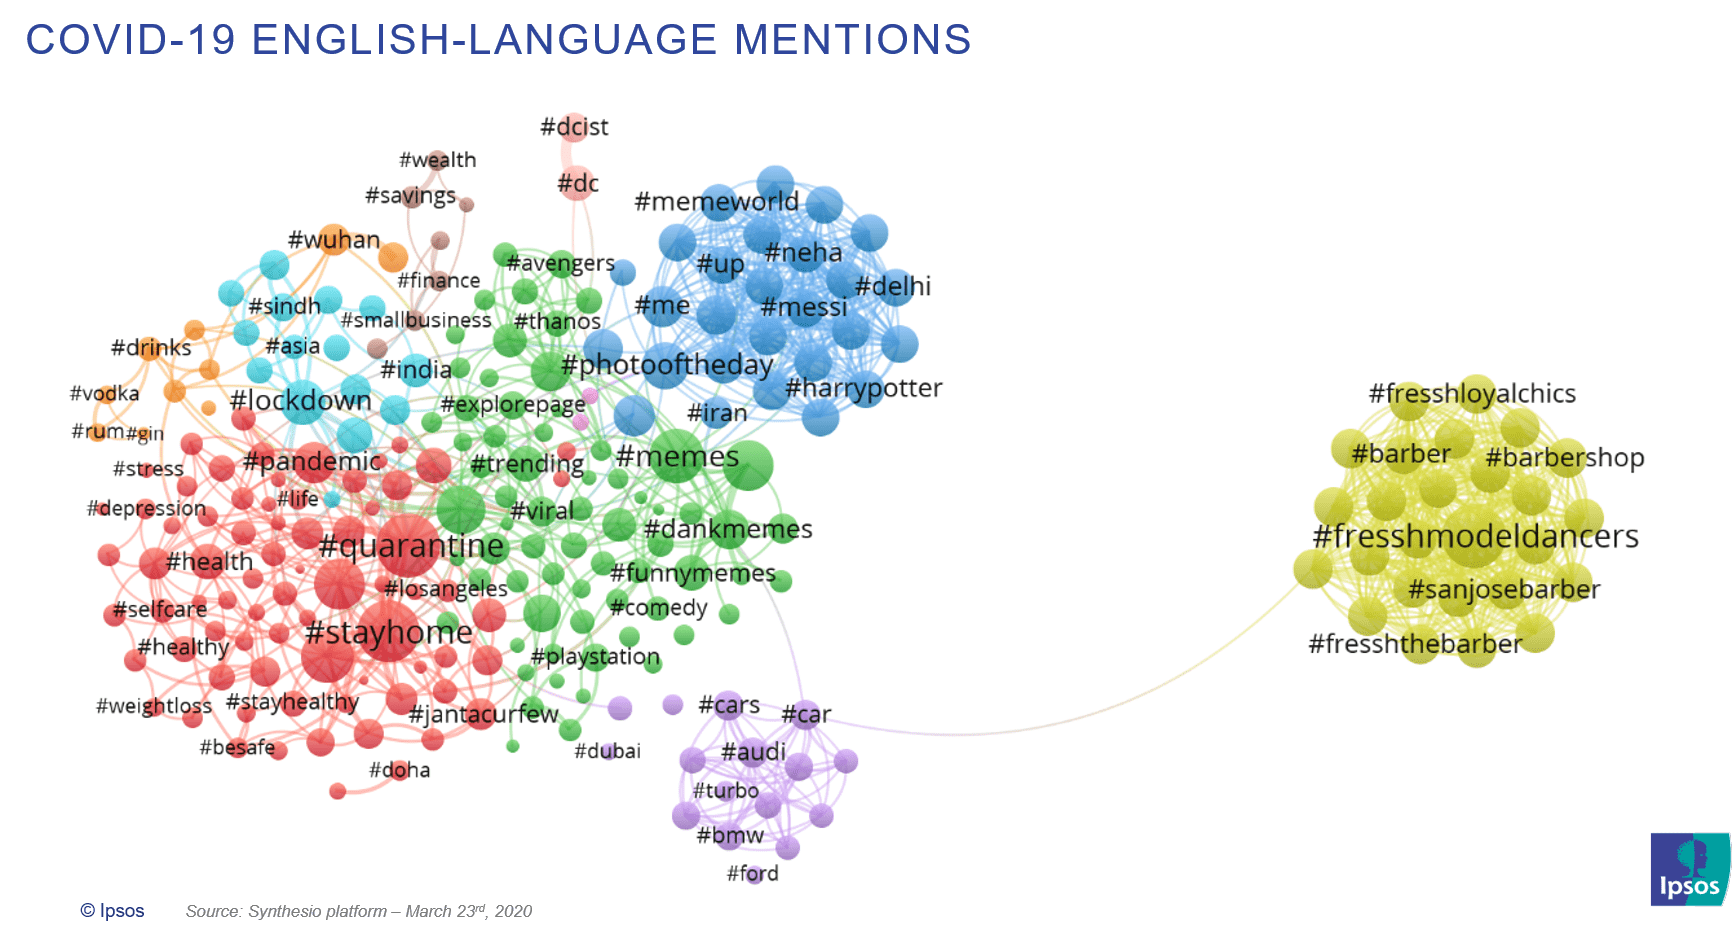 COVID-19 English-language mentions on Twitter | Ipsos | Synthesio